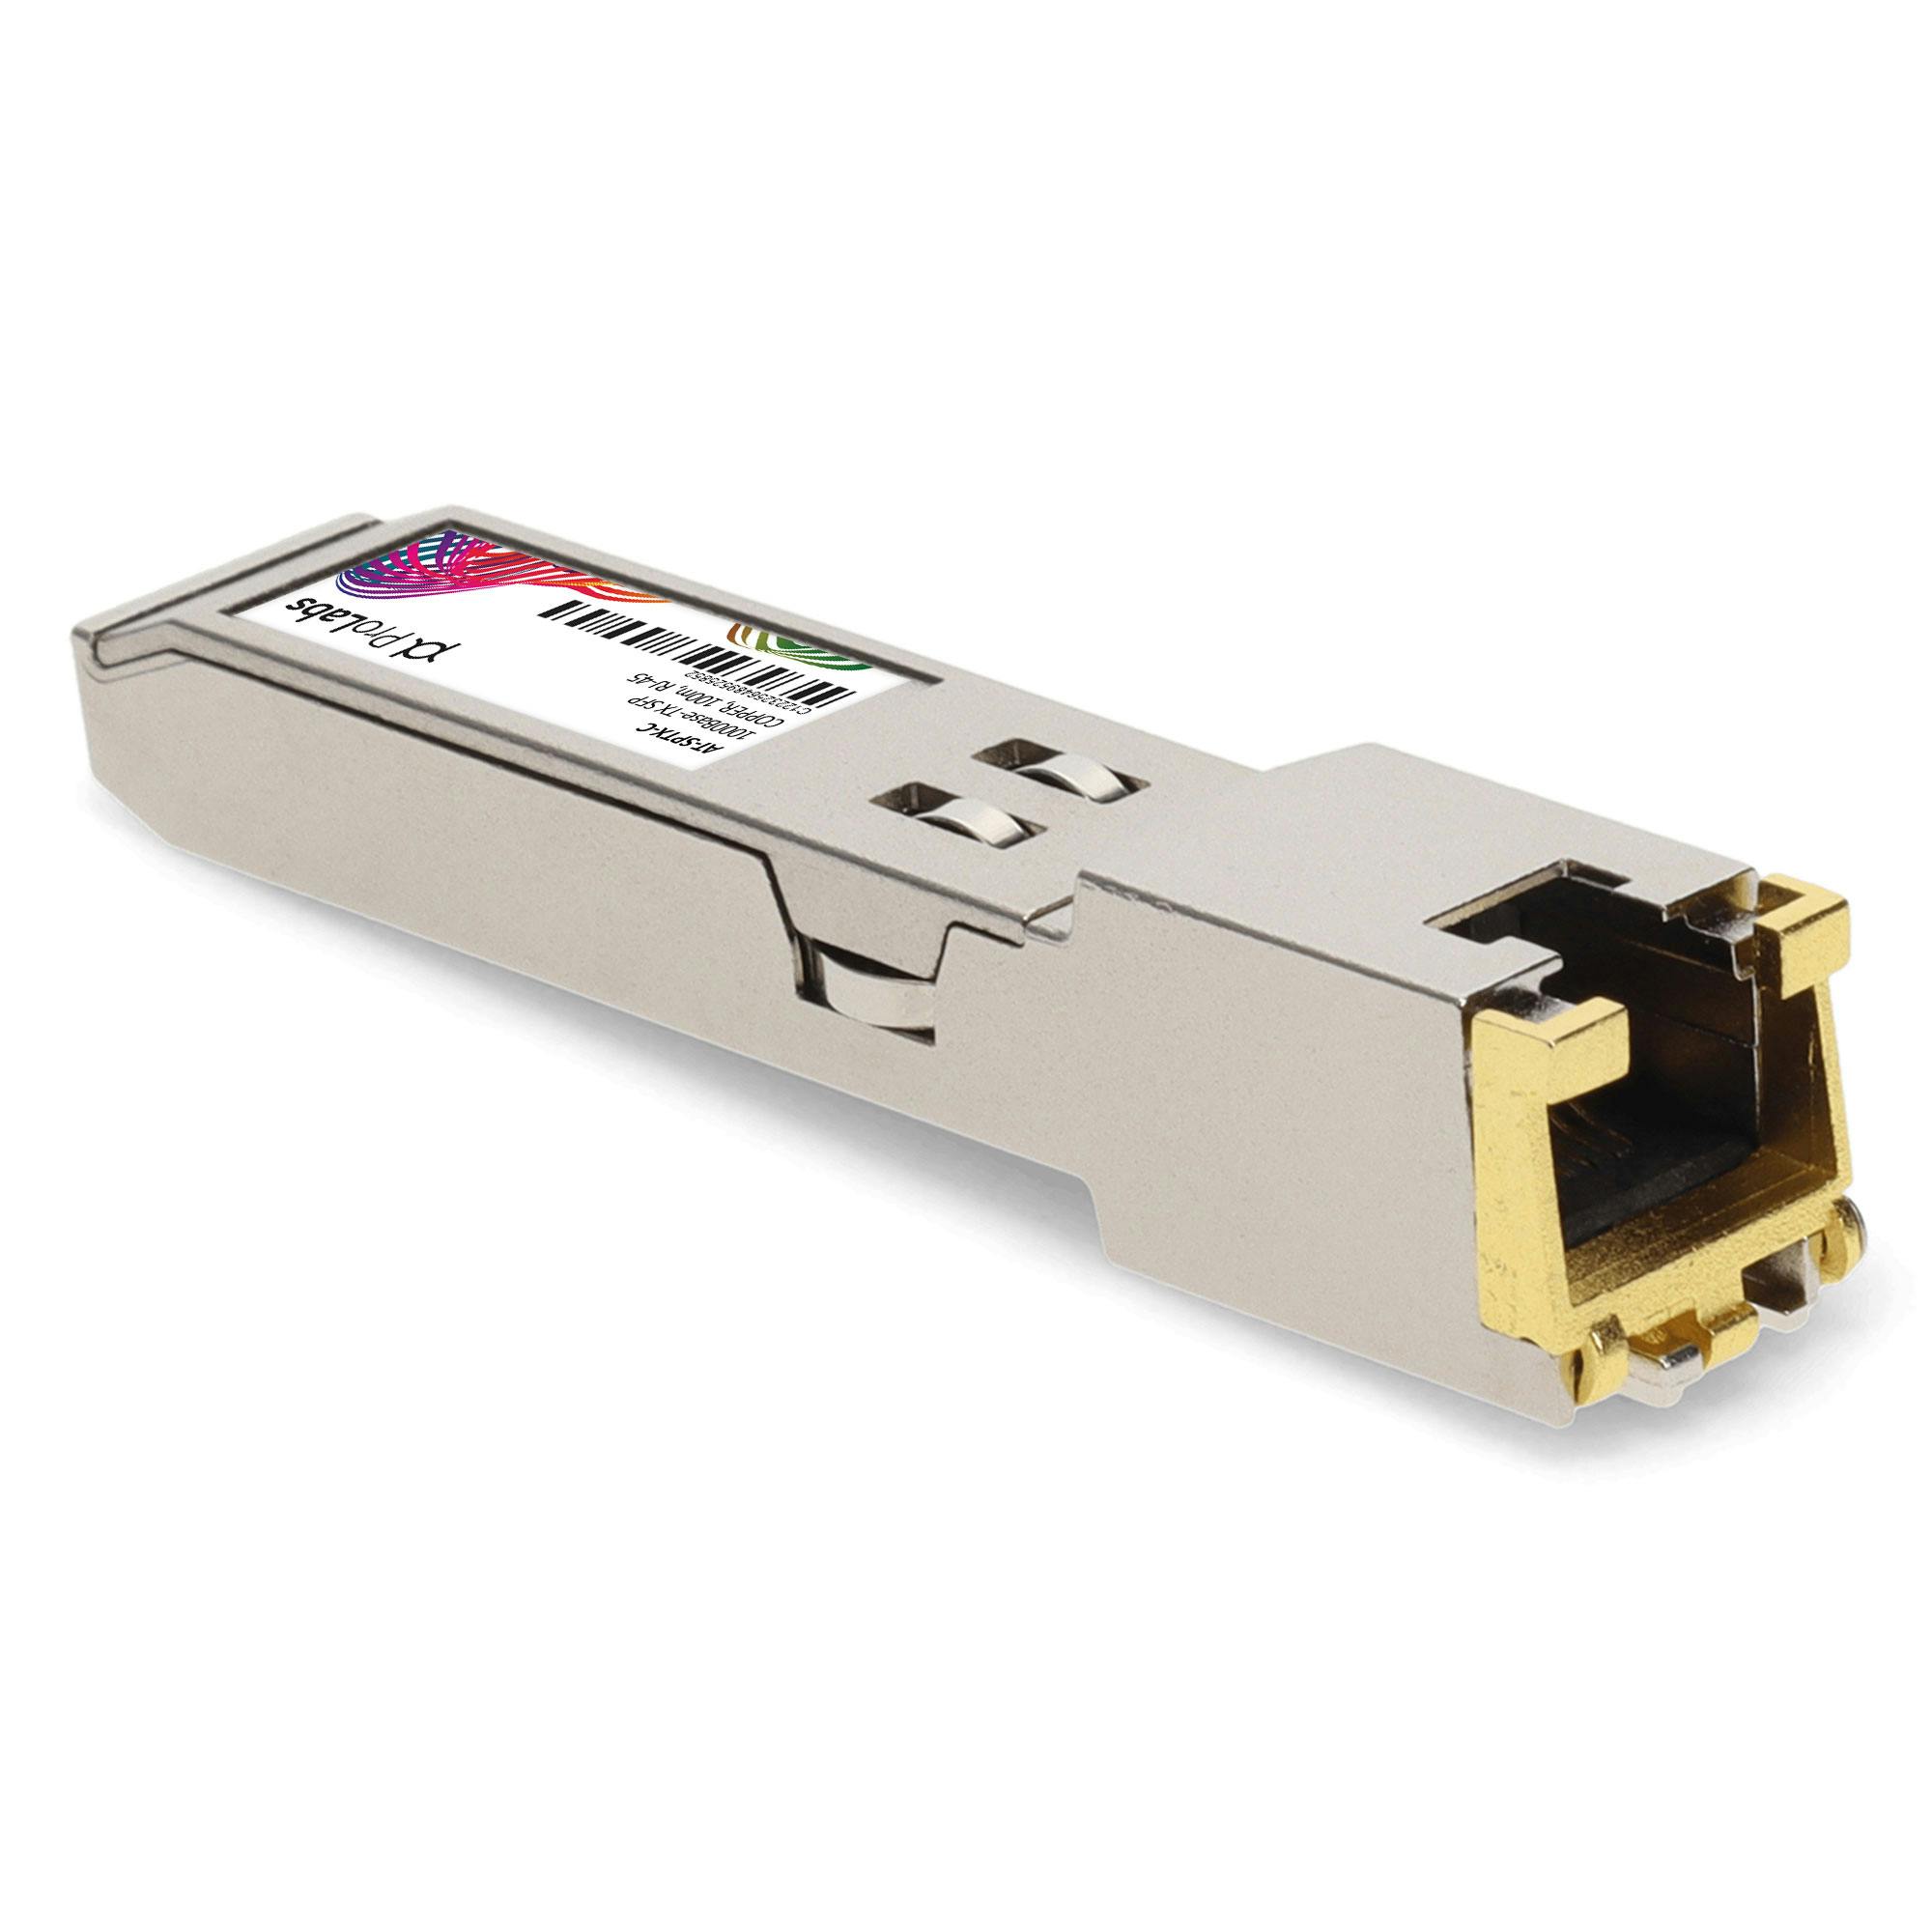 SNS at-SPTX Compatible with Allied Telesis at-SPTX 1000BASE-T SFP Copper Transceiver Module 